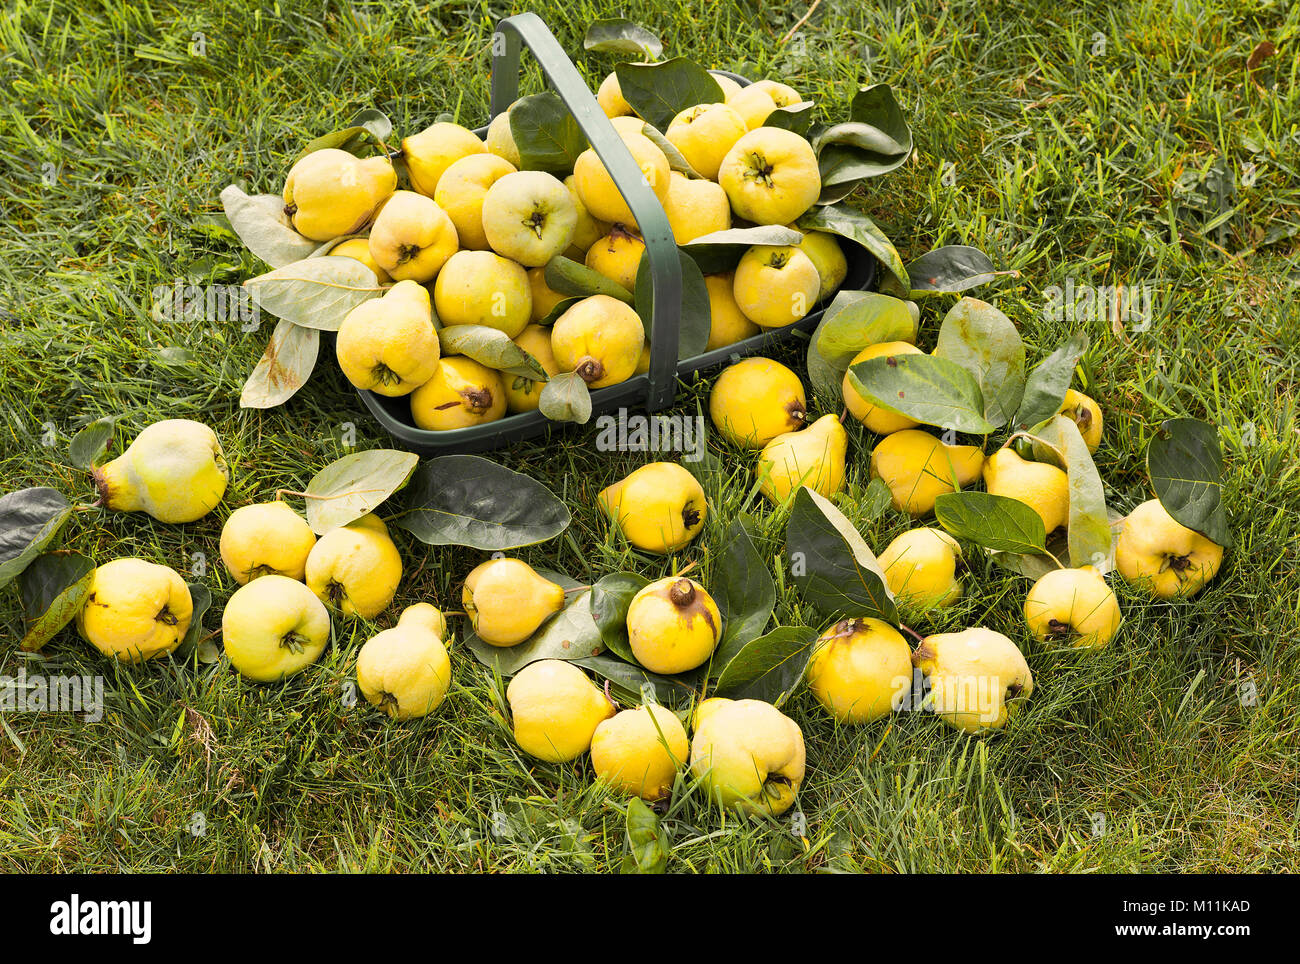 A harvest gathering of edible quince Cydonia oblonga Meech's Prolific in Wiltshire England UK Stock Photo